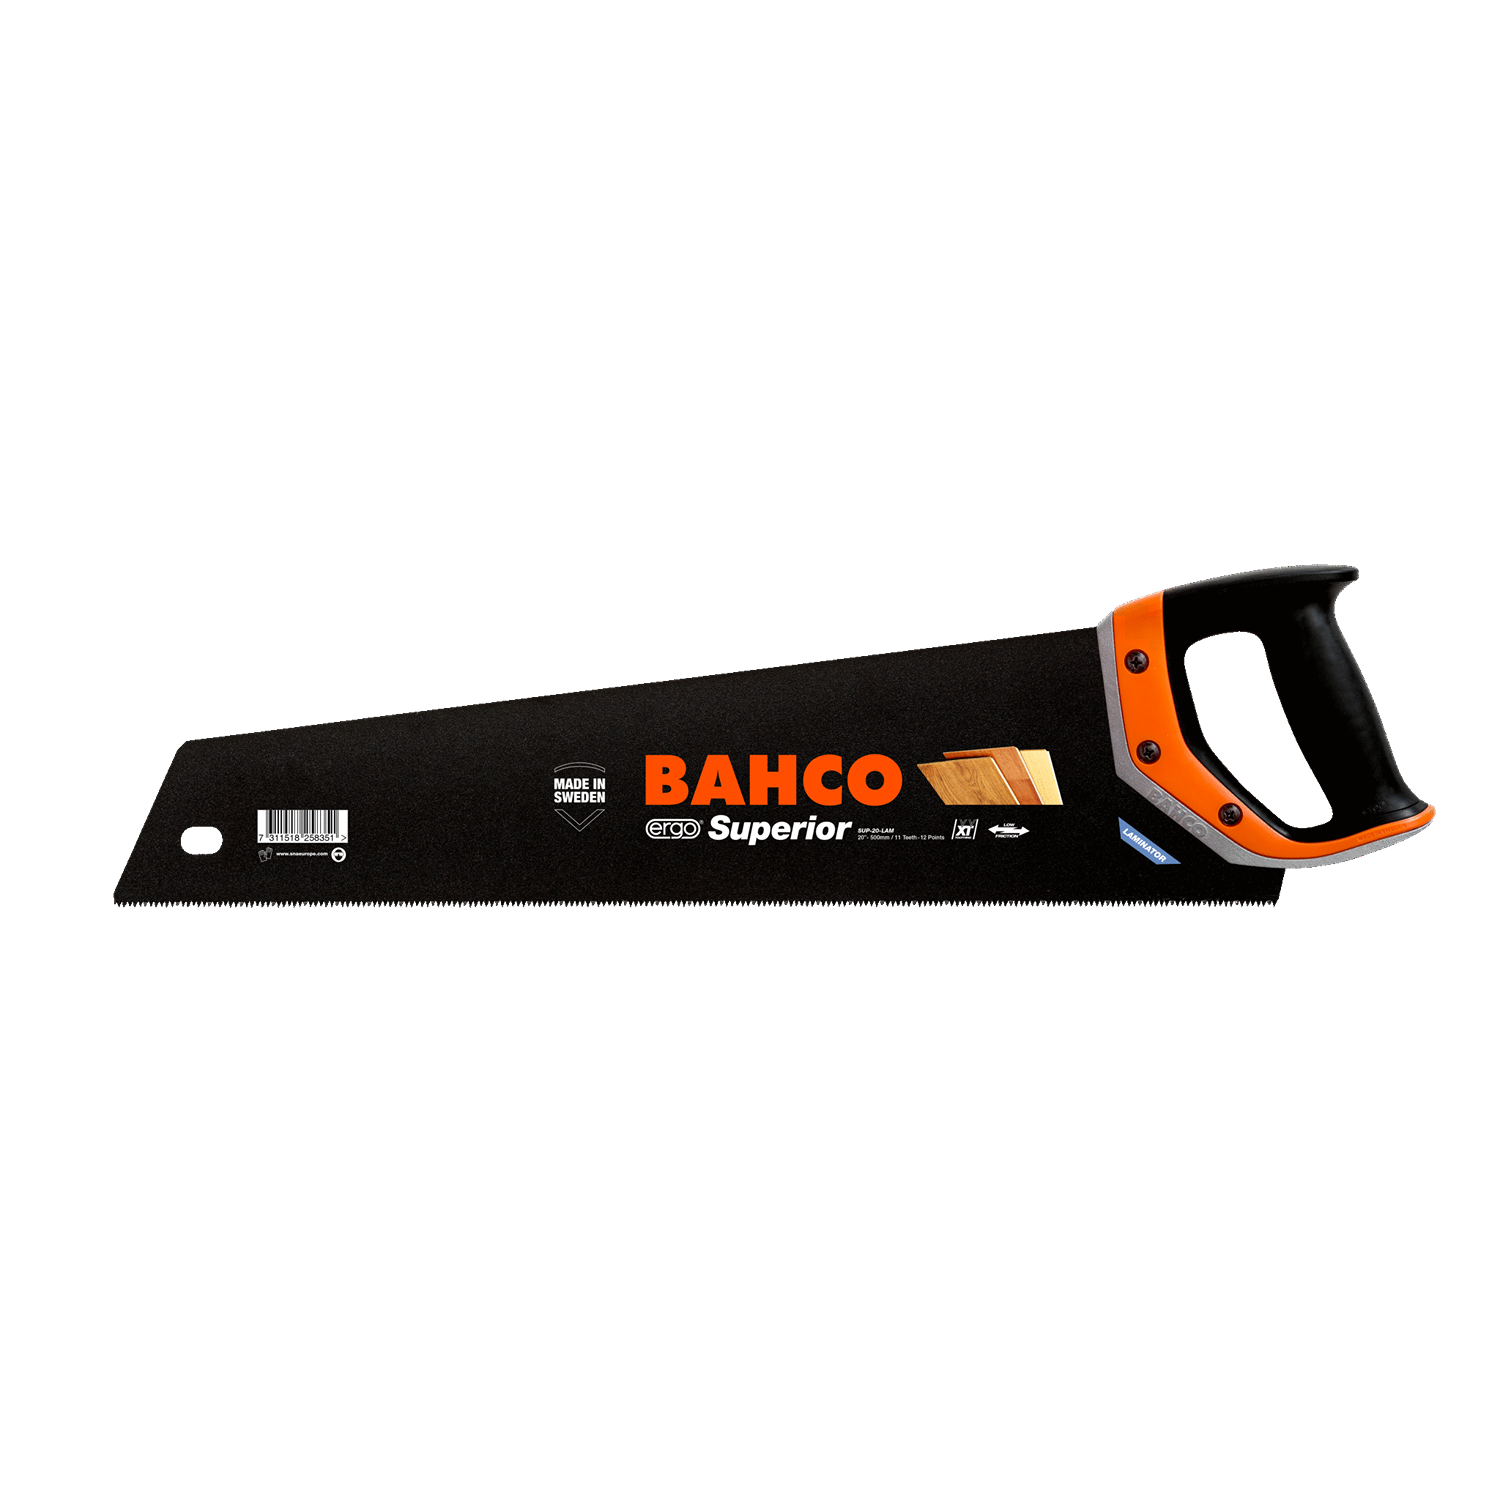 BAHCO SUP-LAM ERGO Superior Laminator Handsaw for Laminate - Premium Handsaw from BAHCO - Shop now at Yew Aik.